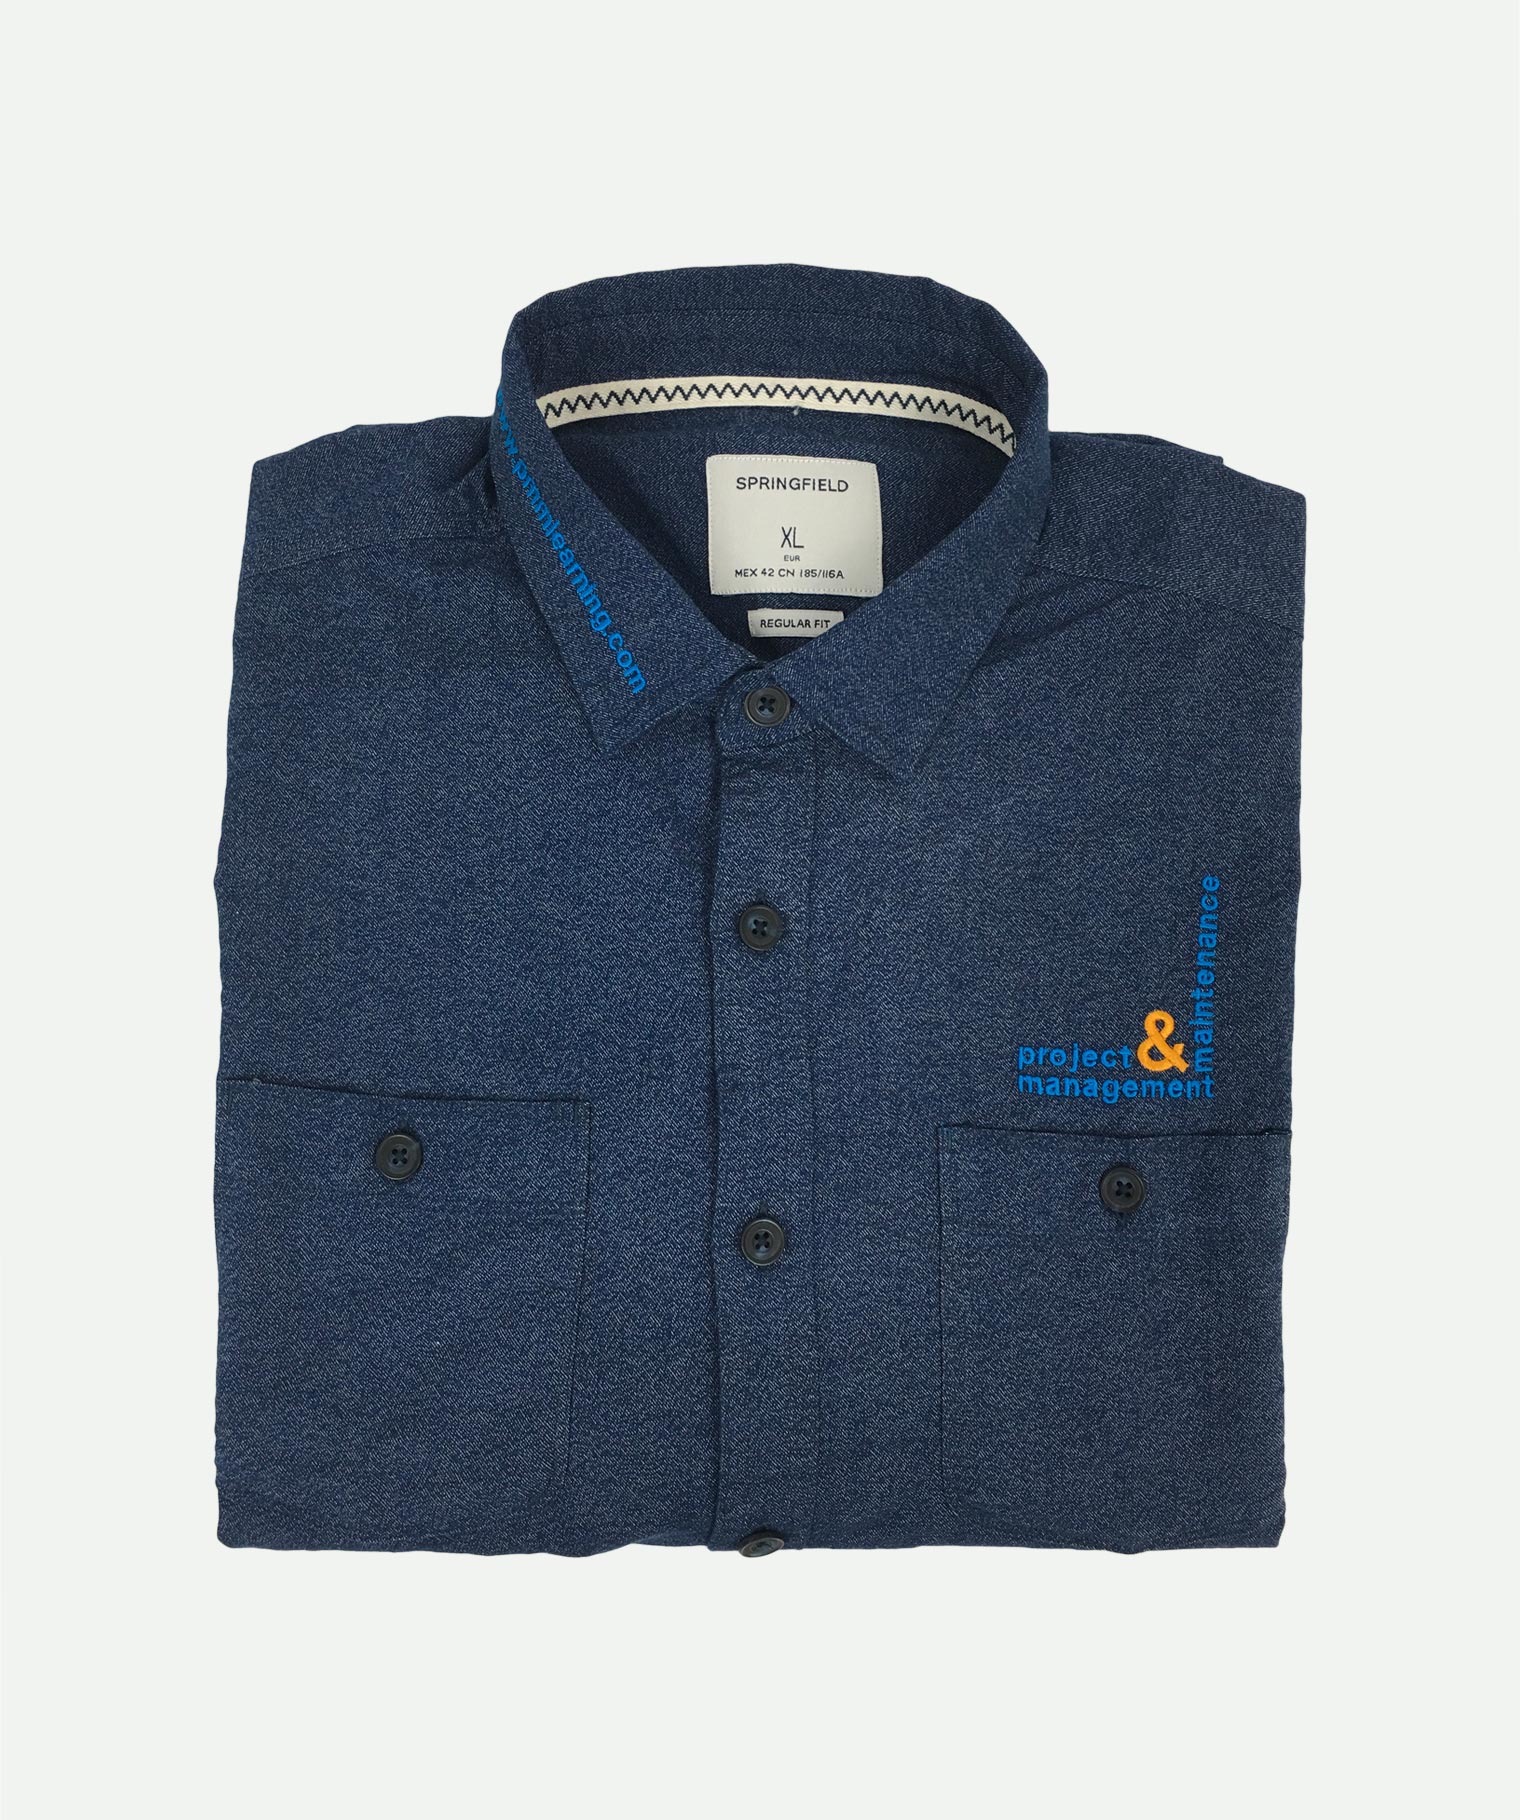 Navy blue shirt with 2 embroideries